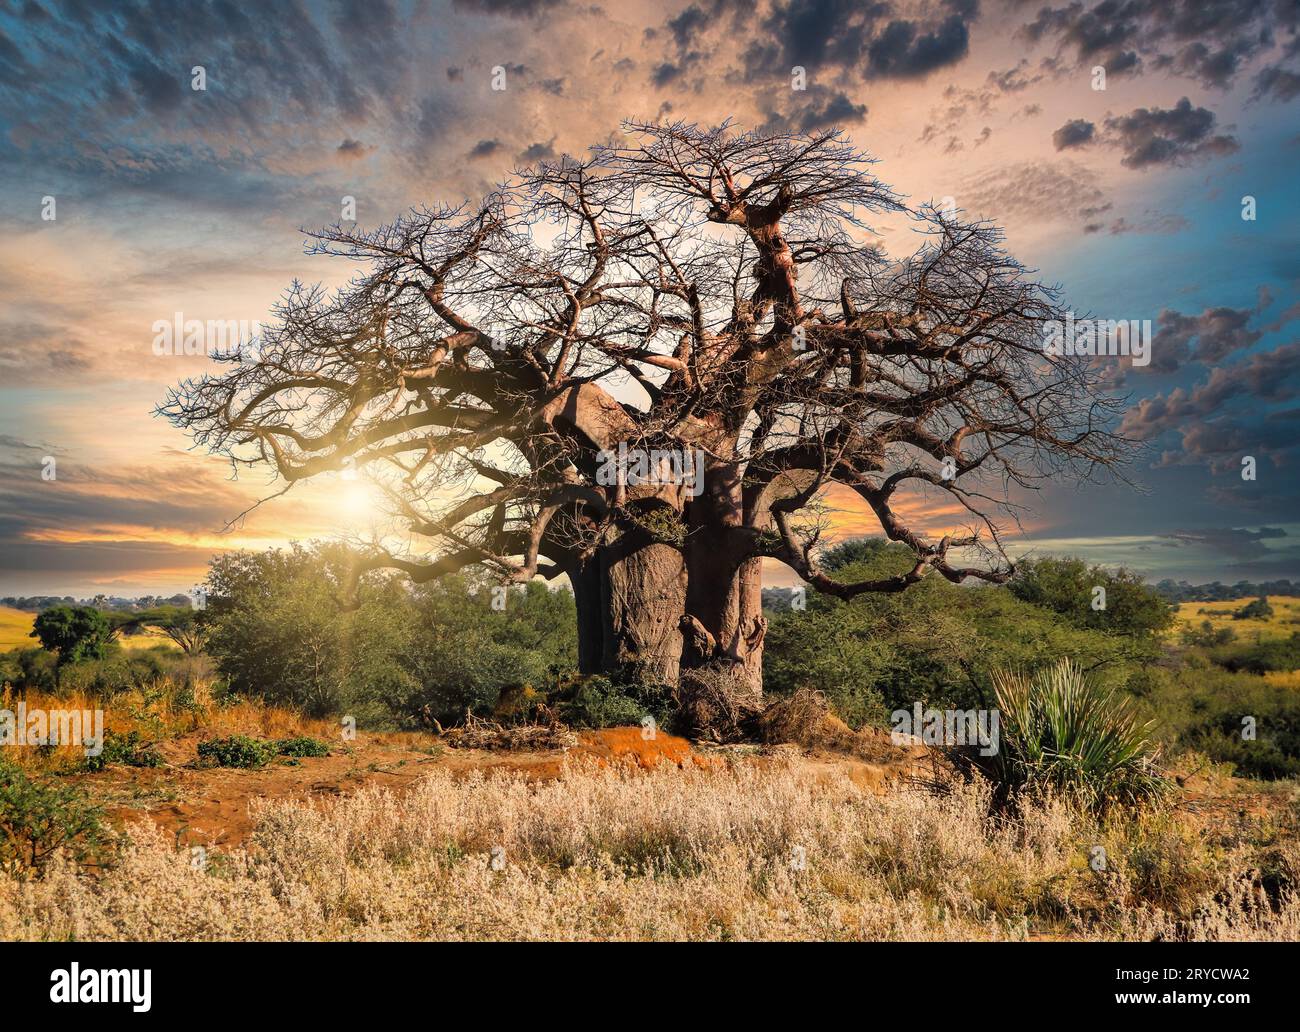 giant baobab tree in the African bush at sunset Stock Photo